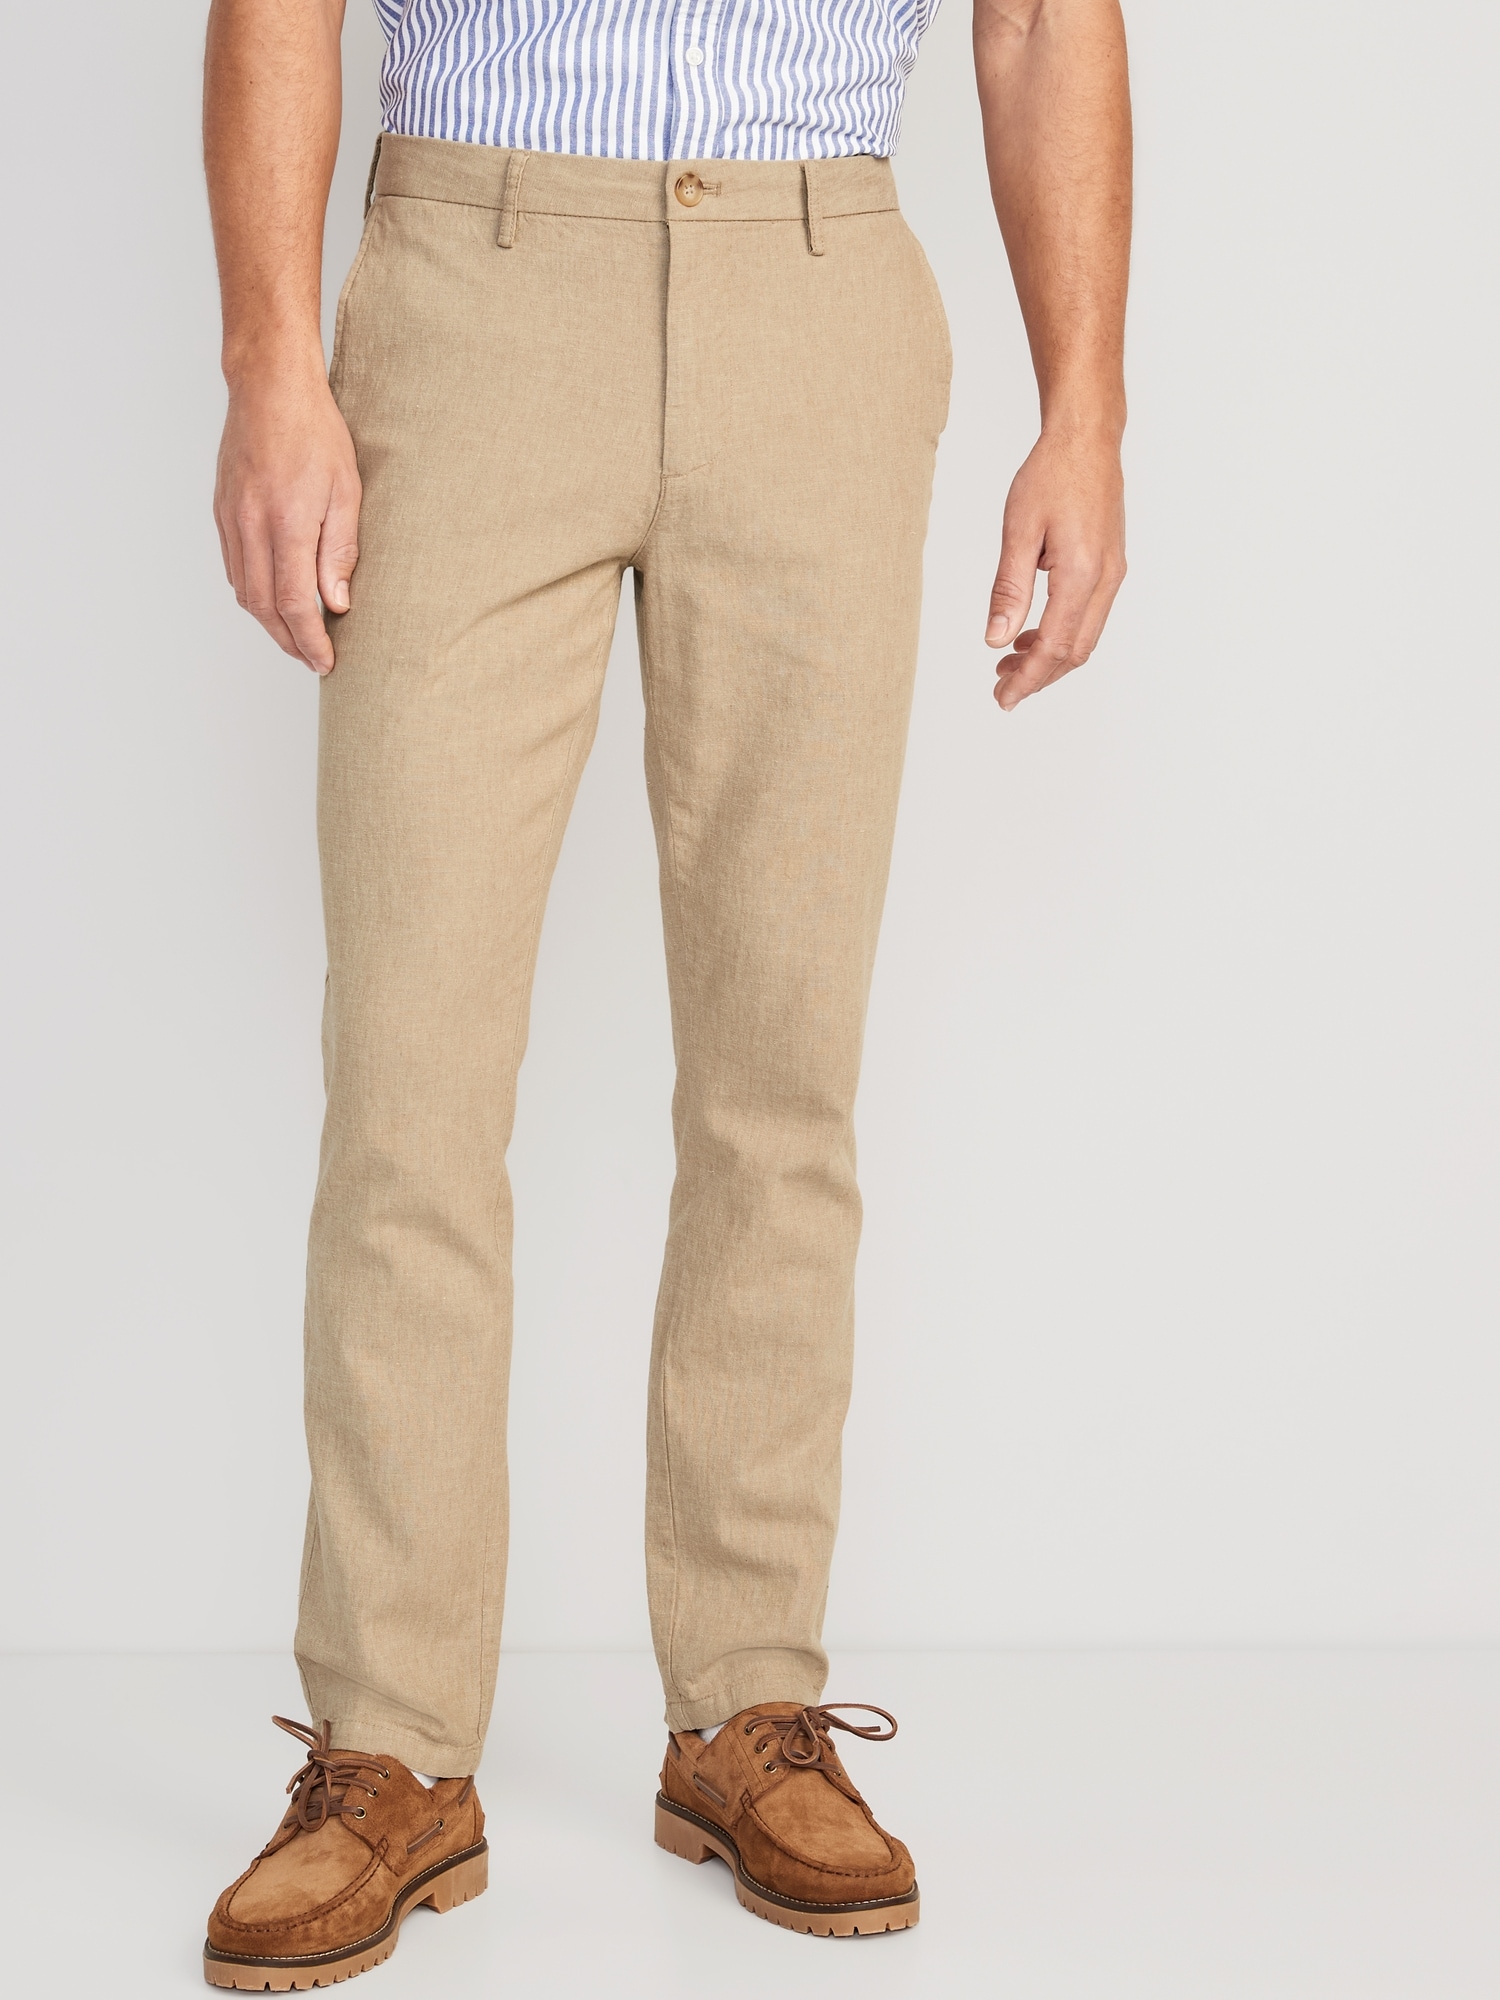 Flannel-Lined Khakis in Slim Fit with GapFlex | Gap